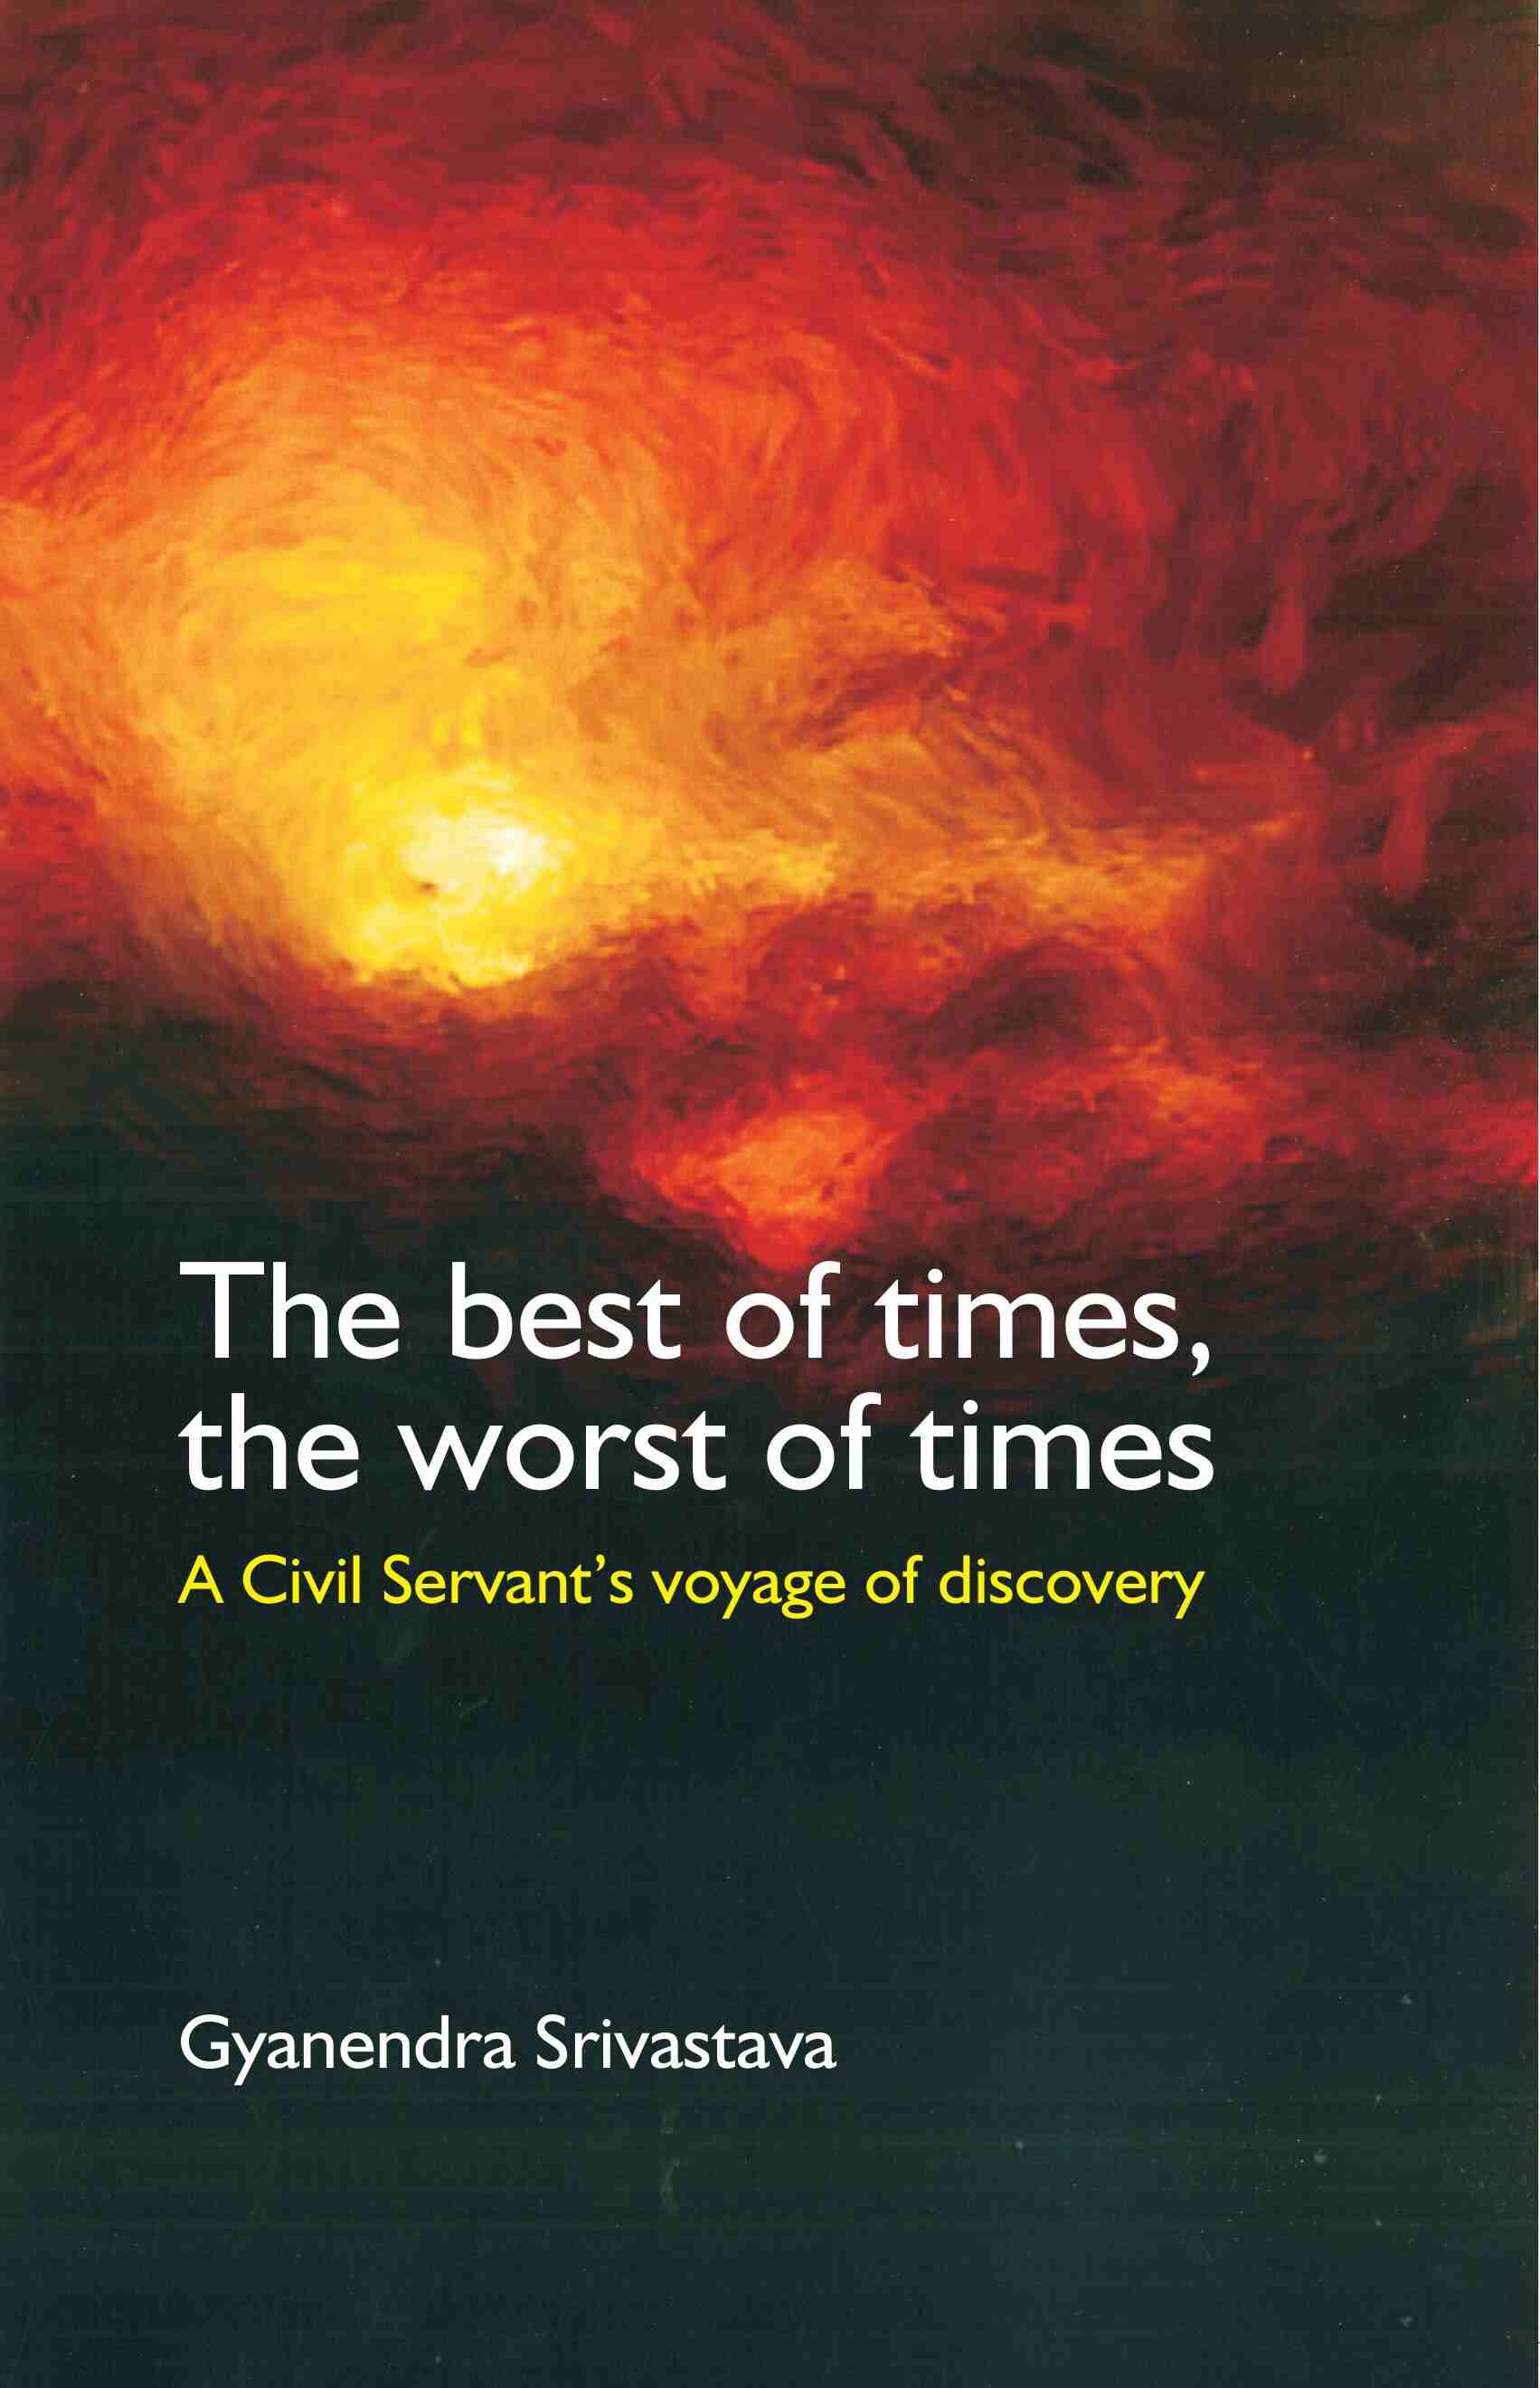 The Best of Times, The Worst of Times: A Civil Servant's Voyage of Discovery